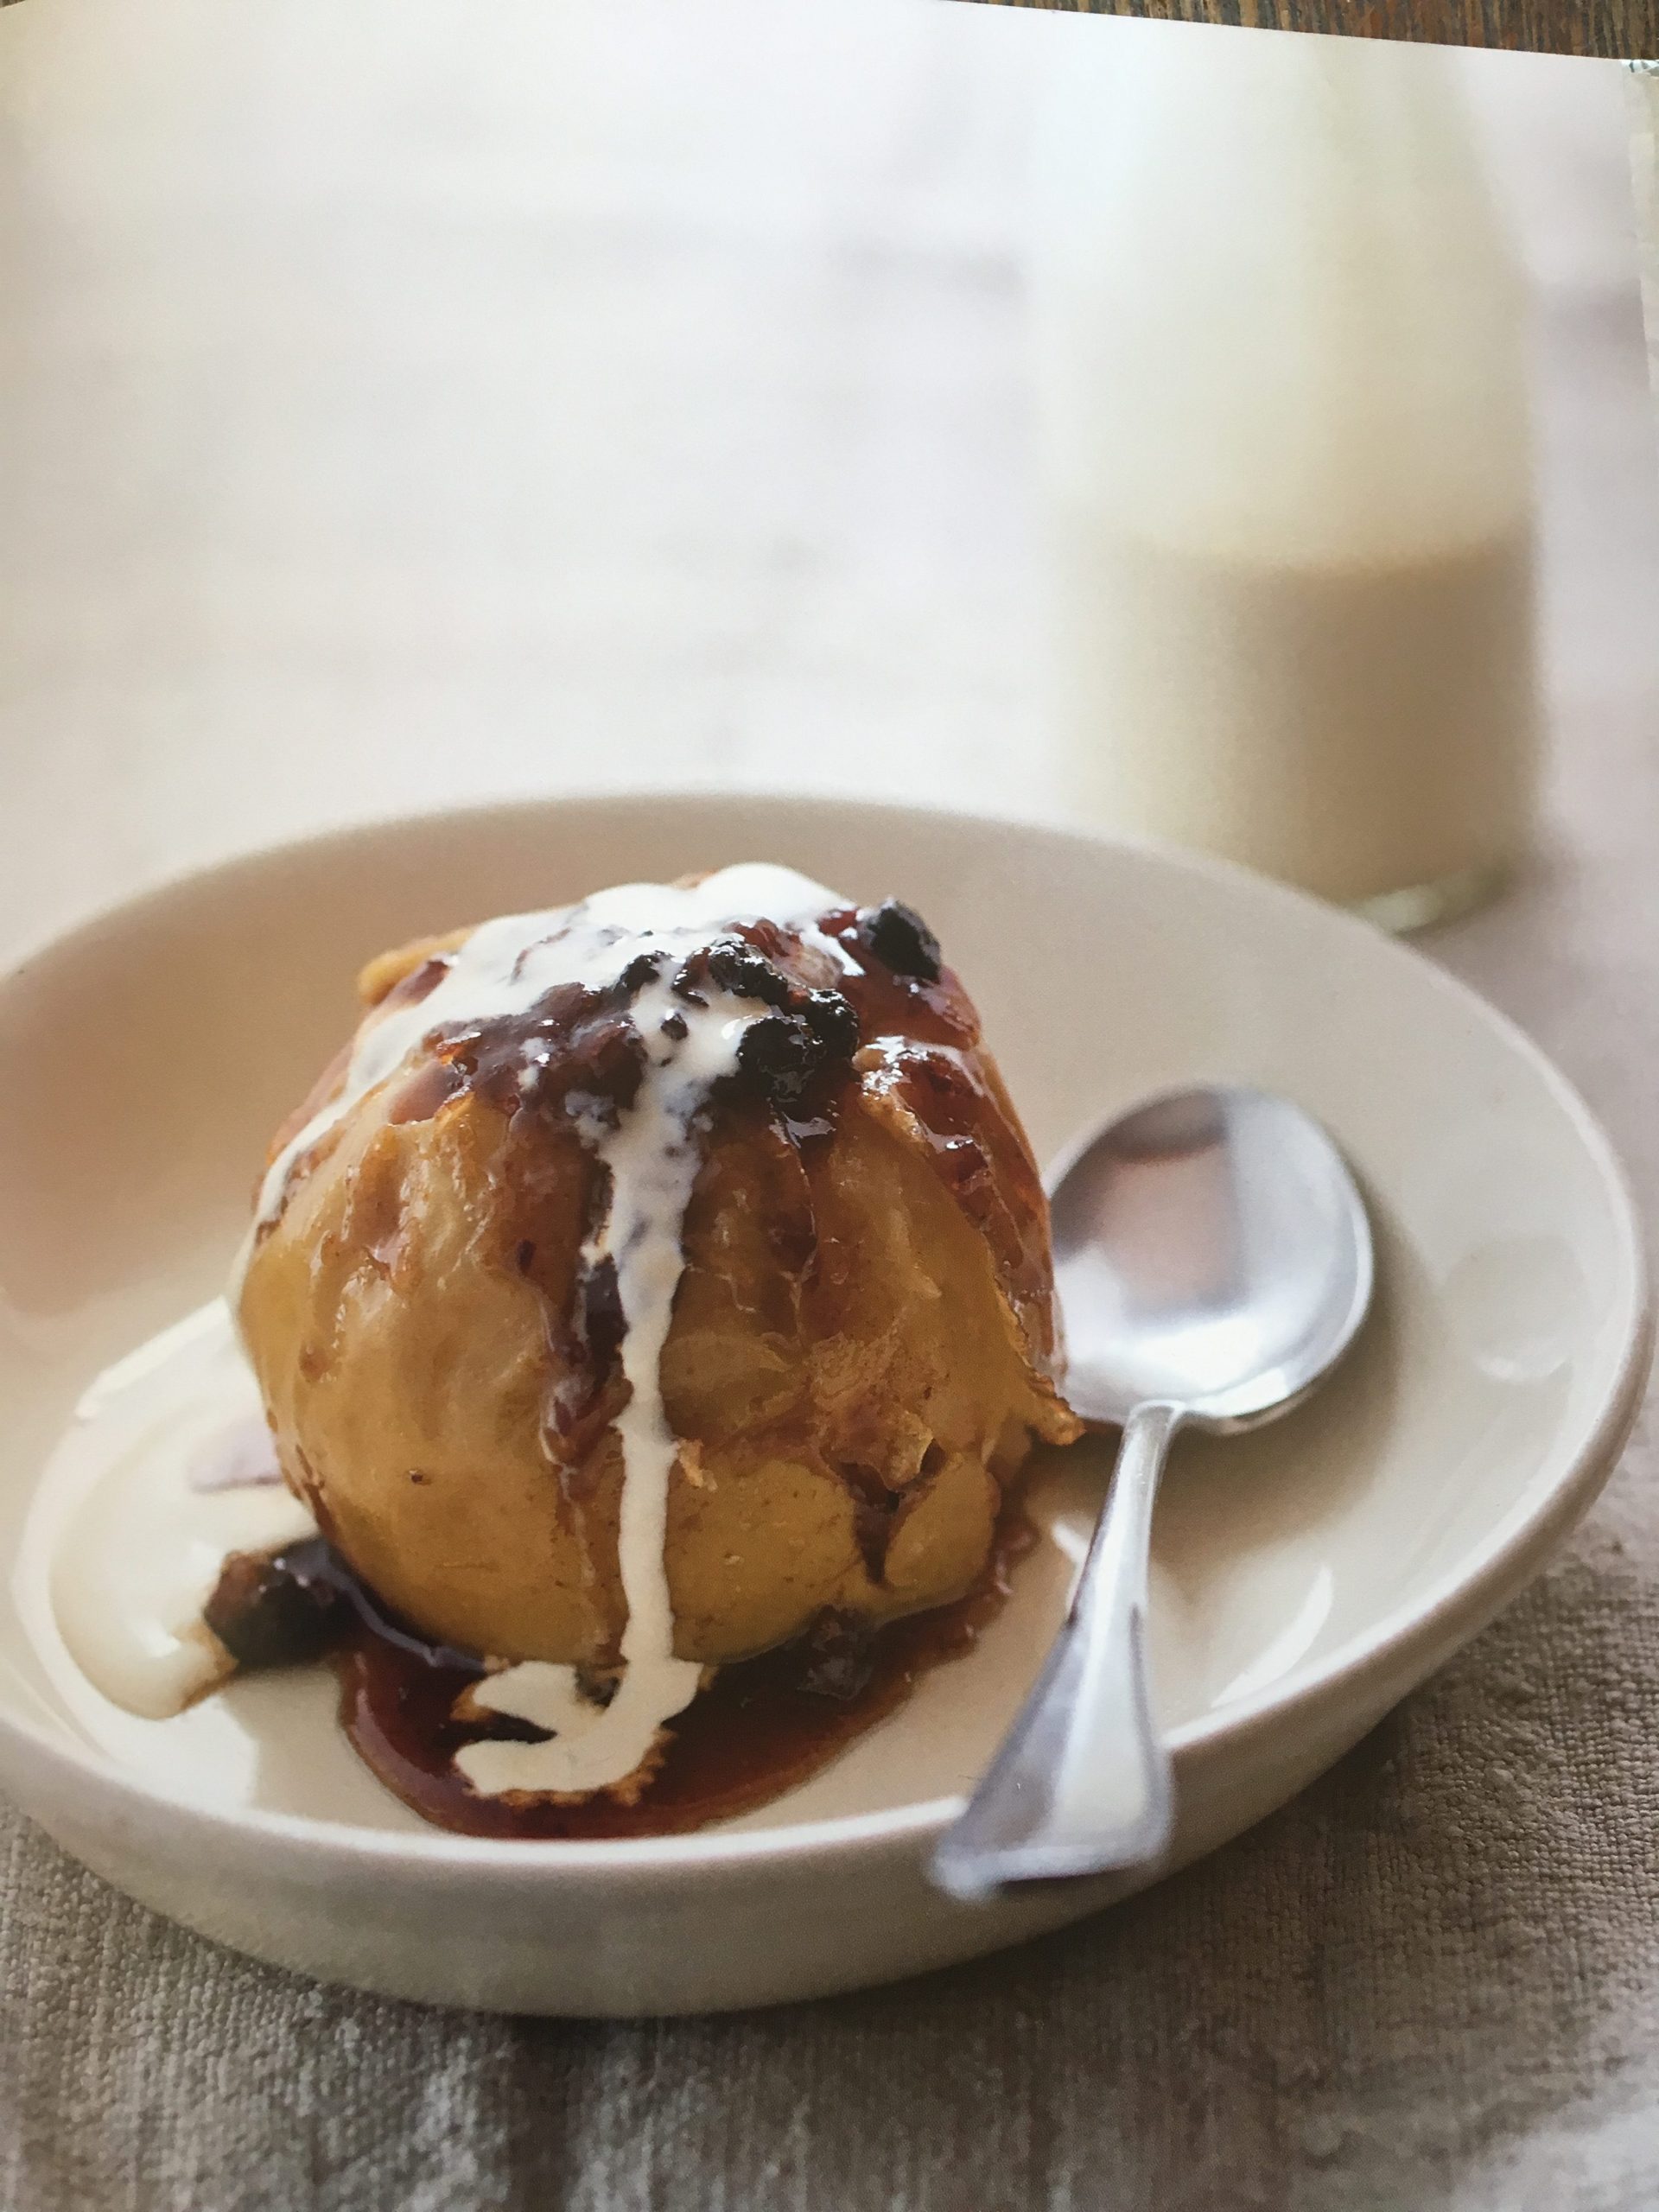 Matthew Evans’ Baked Apples with dates and brown sugar